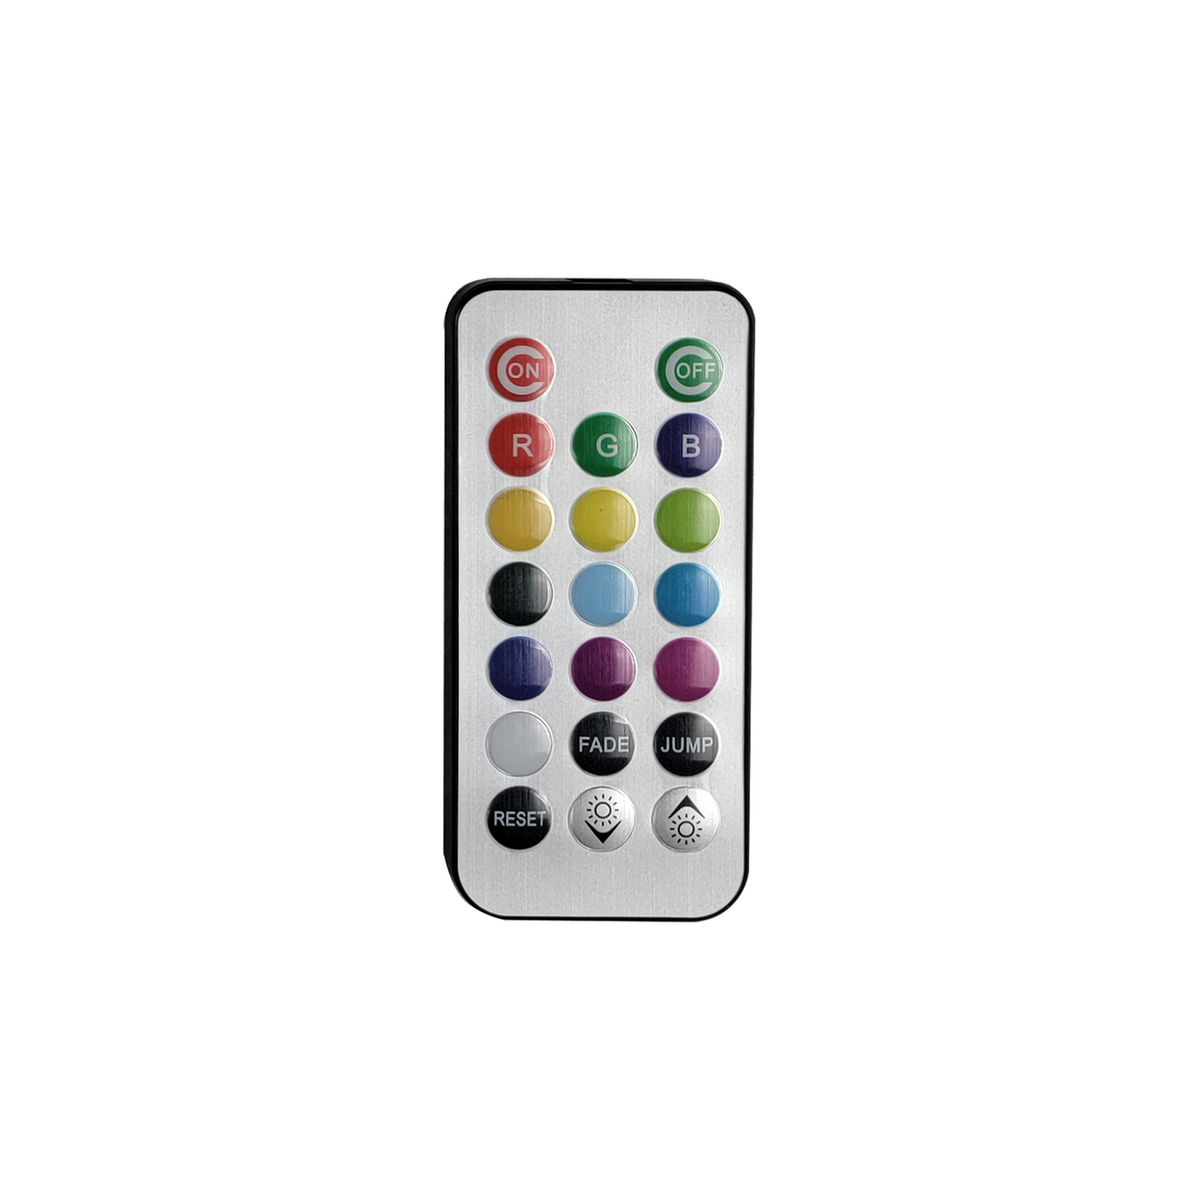 Living Glow Under-Cabinet Light Replacement Remote Control, LG-UCLR